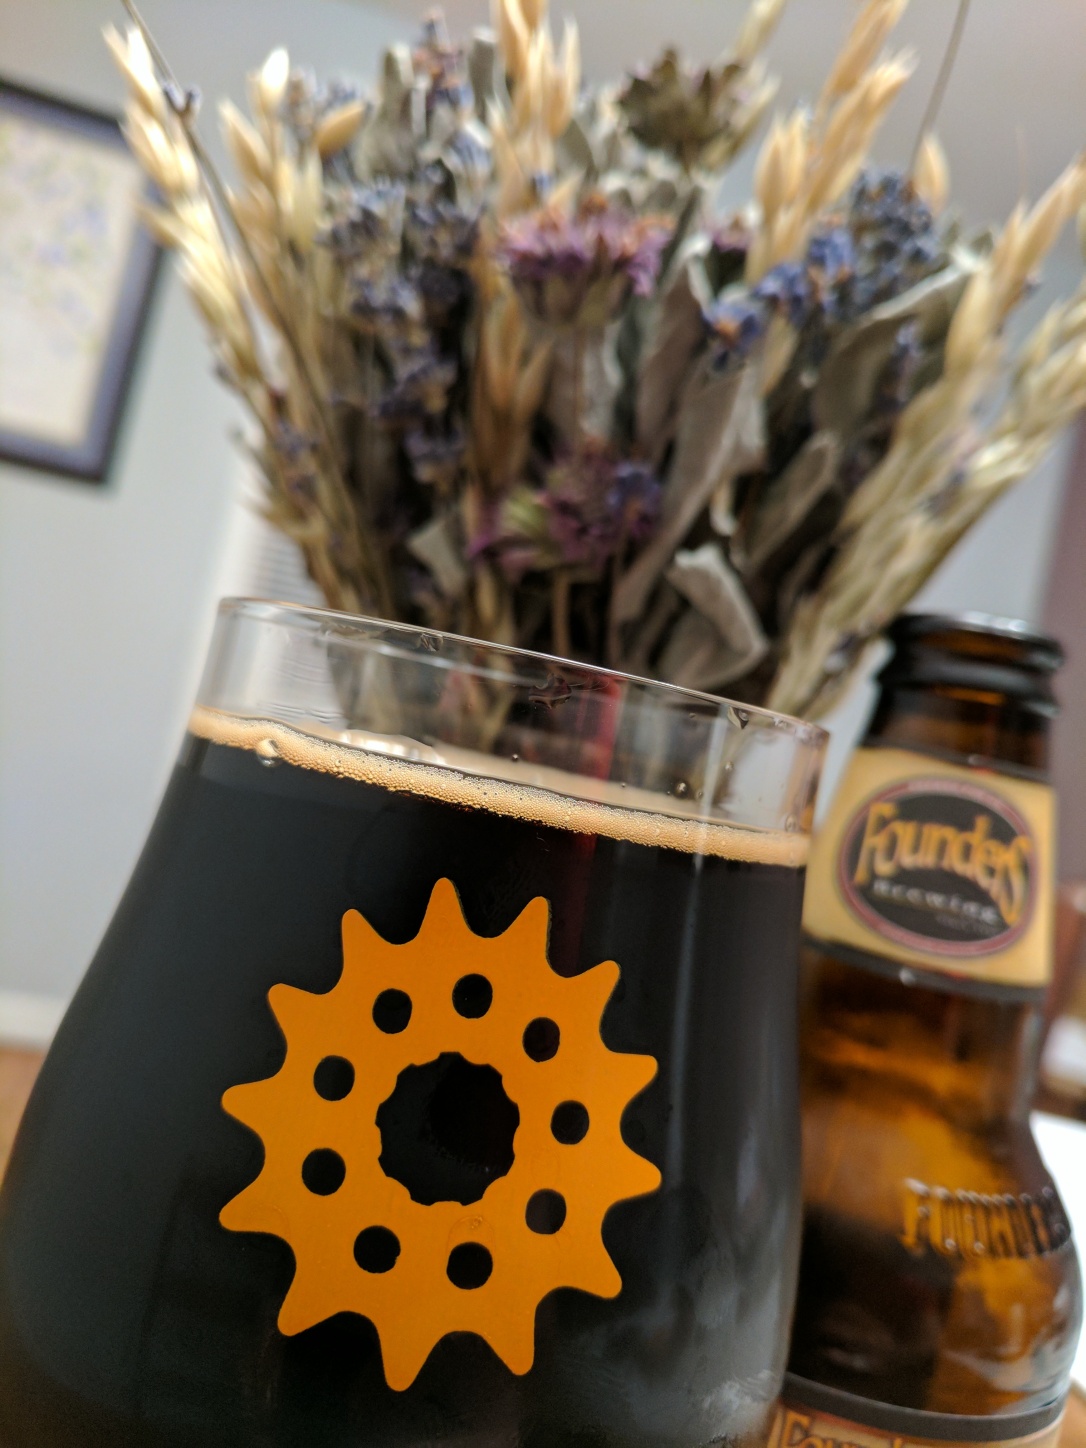 KBS Brewed For Us (and Me!)